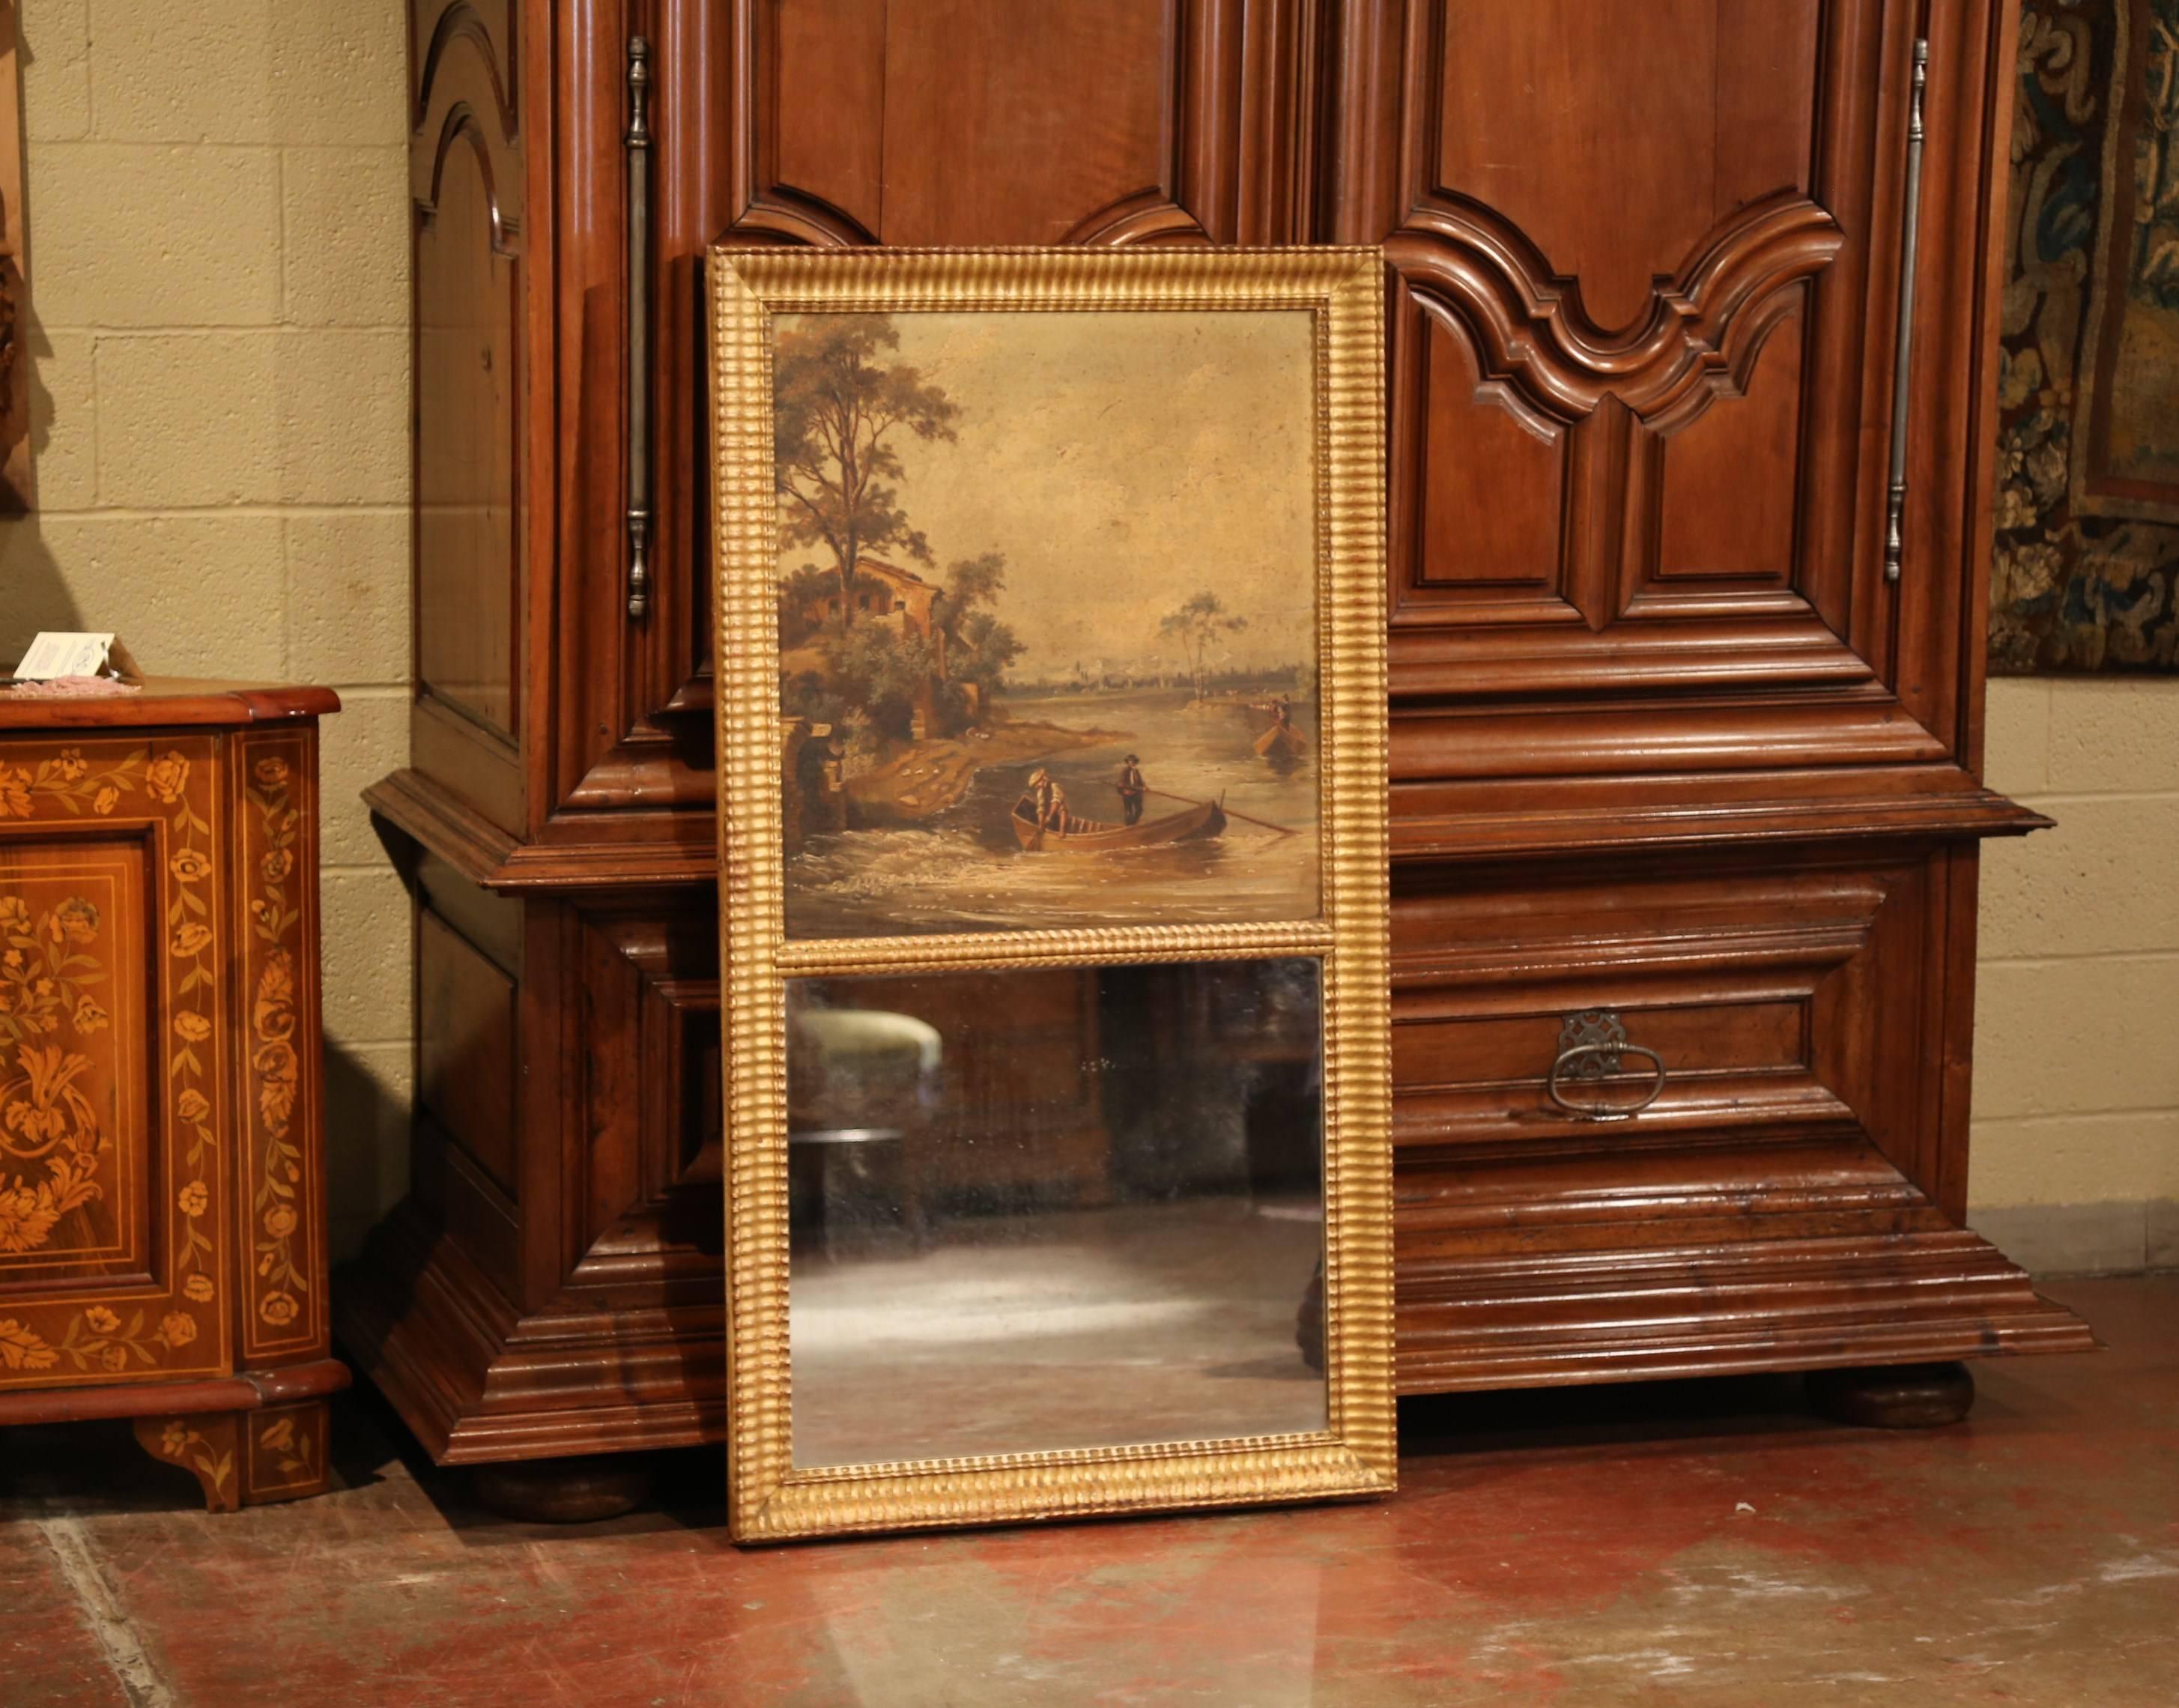 Elegant antique trumeau from France crafted circa 1850, the wall hanging mirror features a hand painted pastoral scene on canvas with fishermen and farmhouse in the background. The painting is set in the original carved giltwood frame embellished by